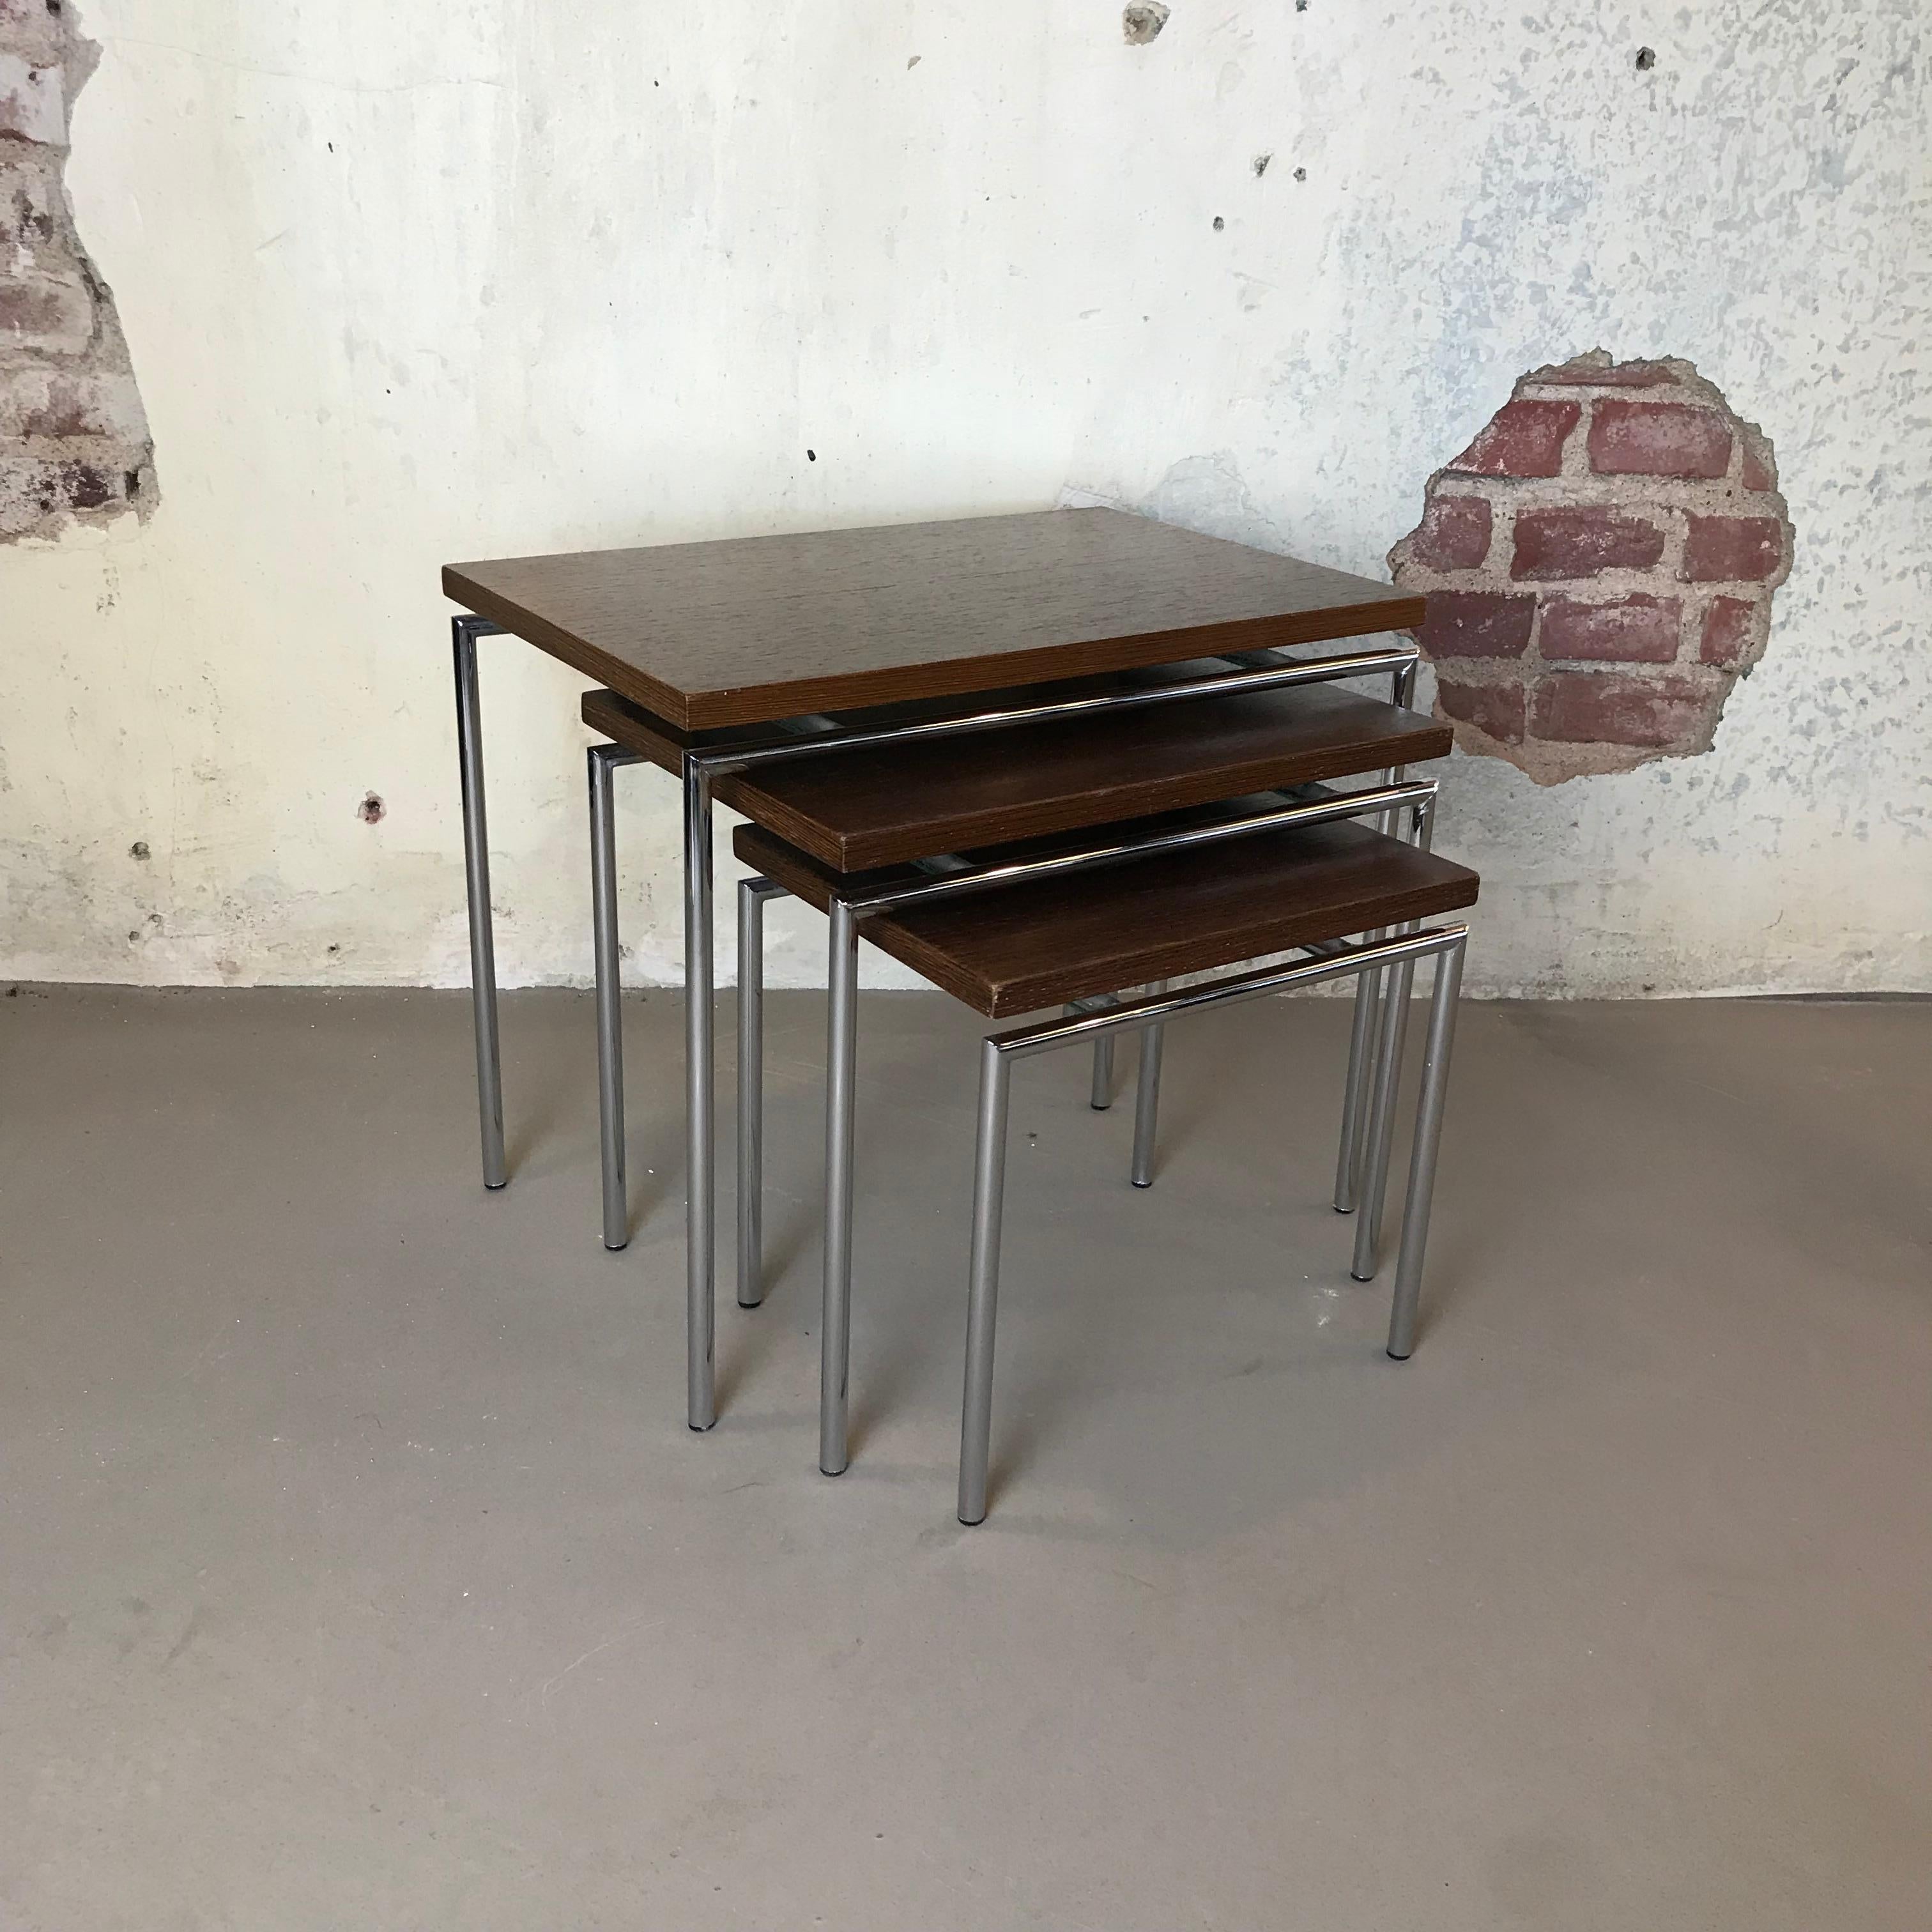 Beautiful set of 3 teak nesting tables designed by Cees Braakman for Pastoe. Teak veneer tops on a chrome plated base. Minimalistic Dutch design. Good vintage condition with little signs of age and use.
Large: 45 x 30 Height 38
Medium: 37 x 27